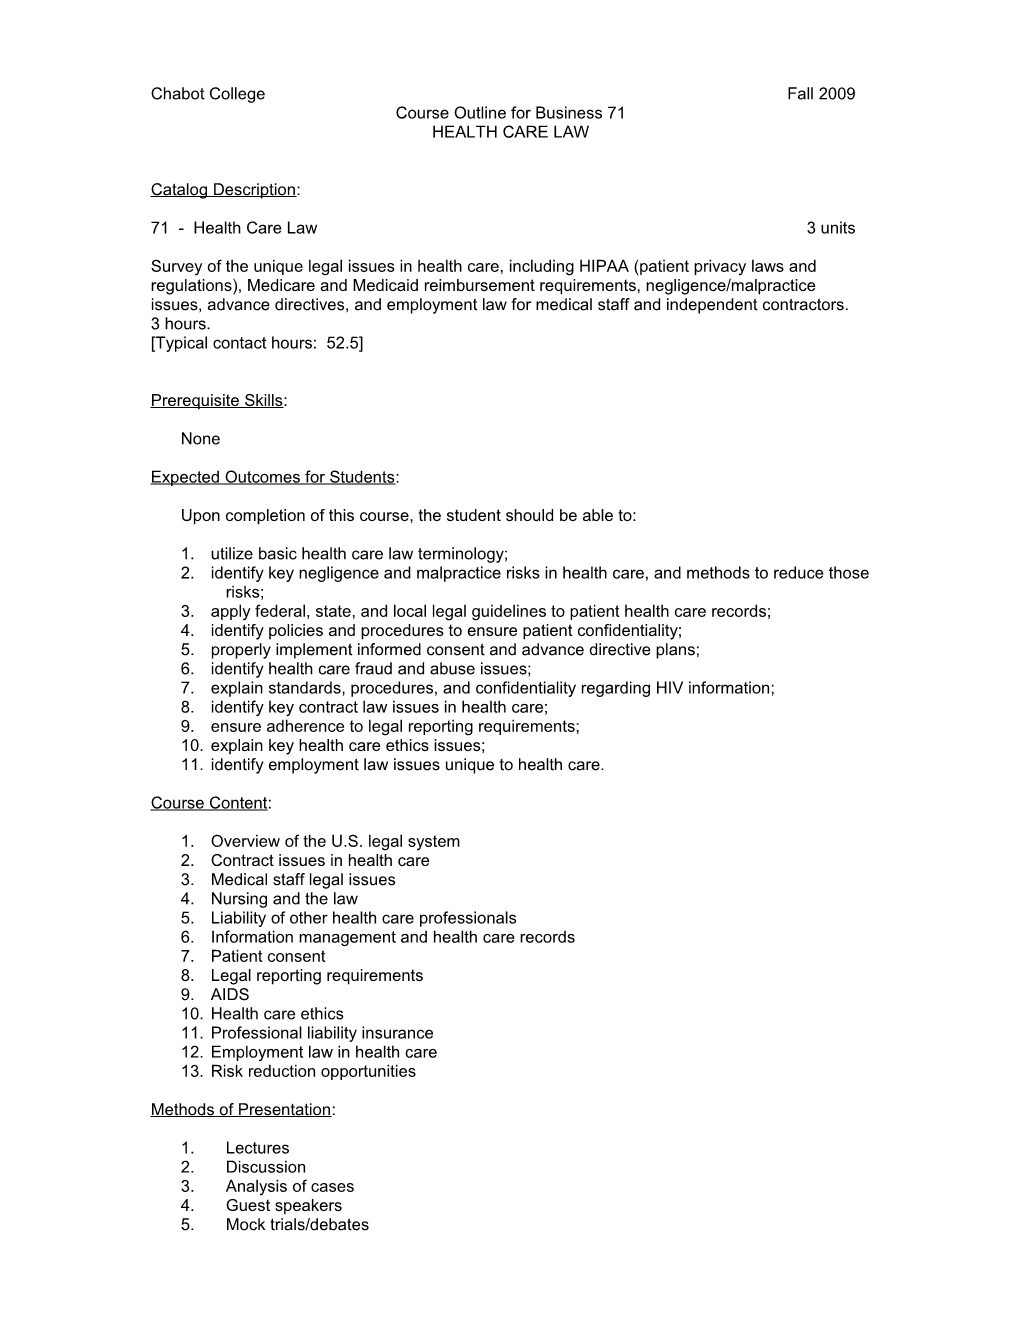 Course Outline for Business 71, Page 2